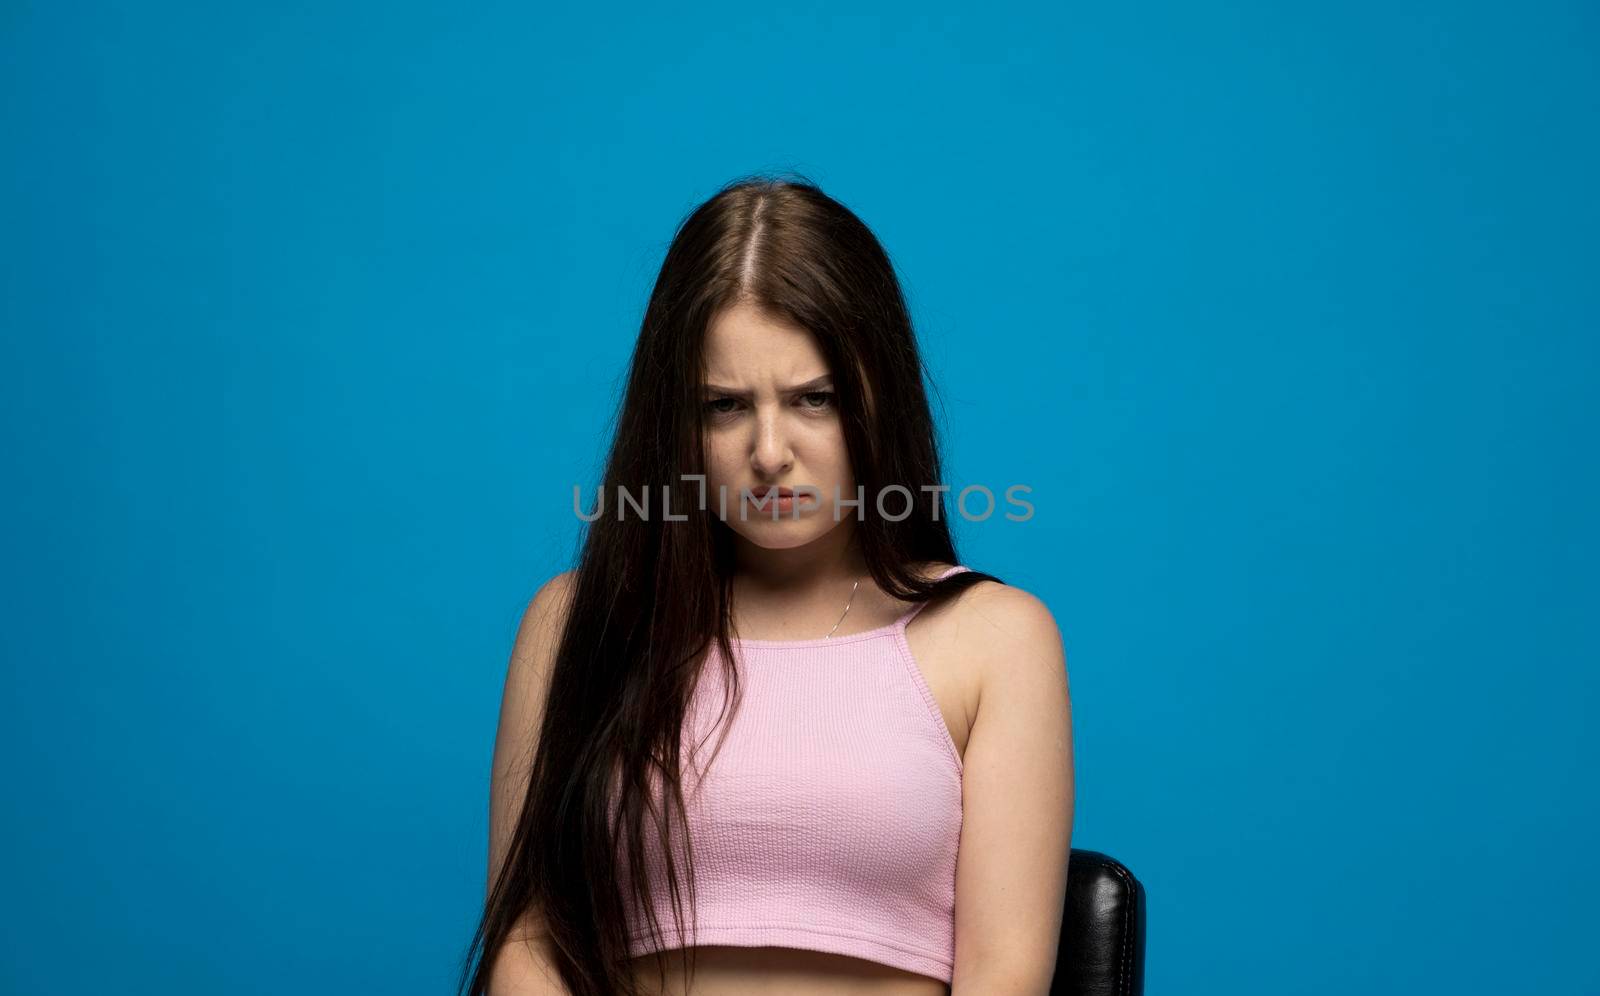 Negative human emotions and feelings. Grumpy young woman posing, frowning eyebrows, her look and grimace expressing anger, annoyance and dislike